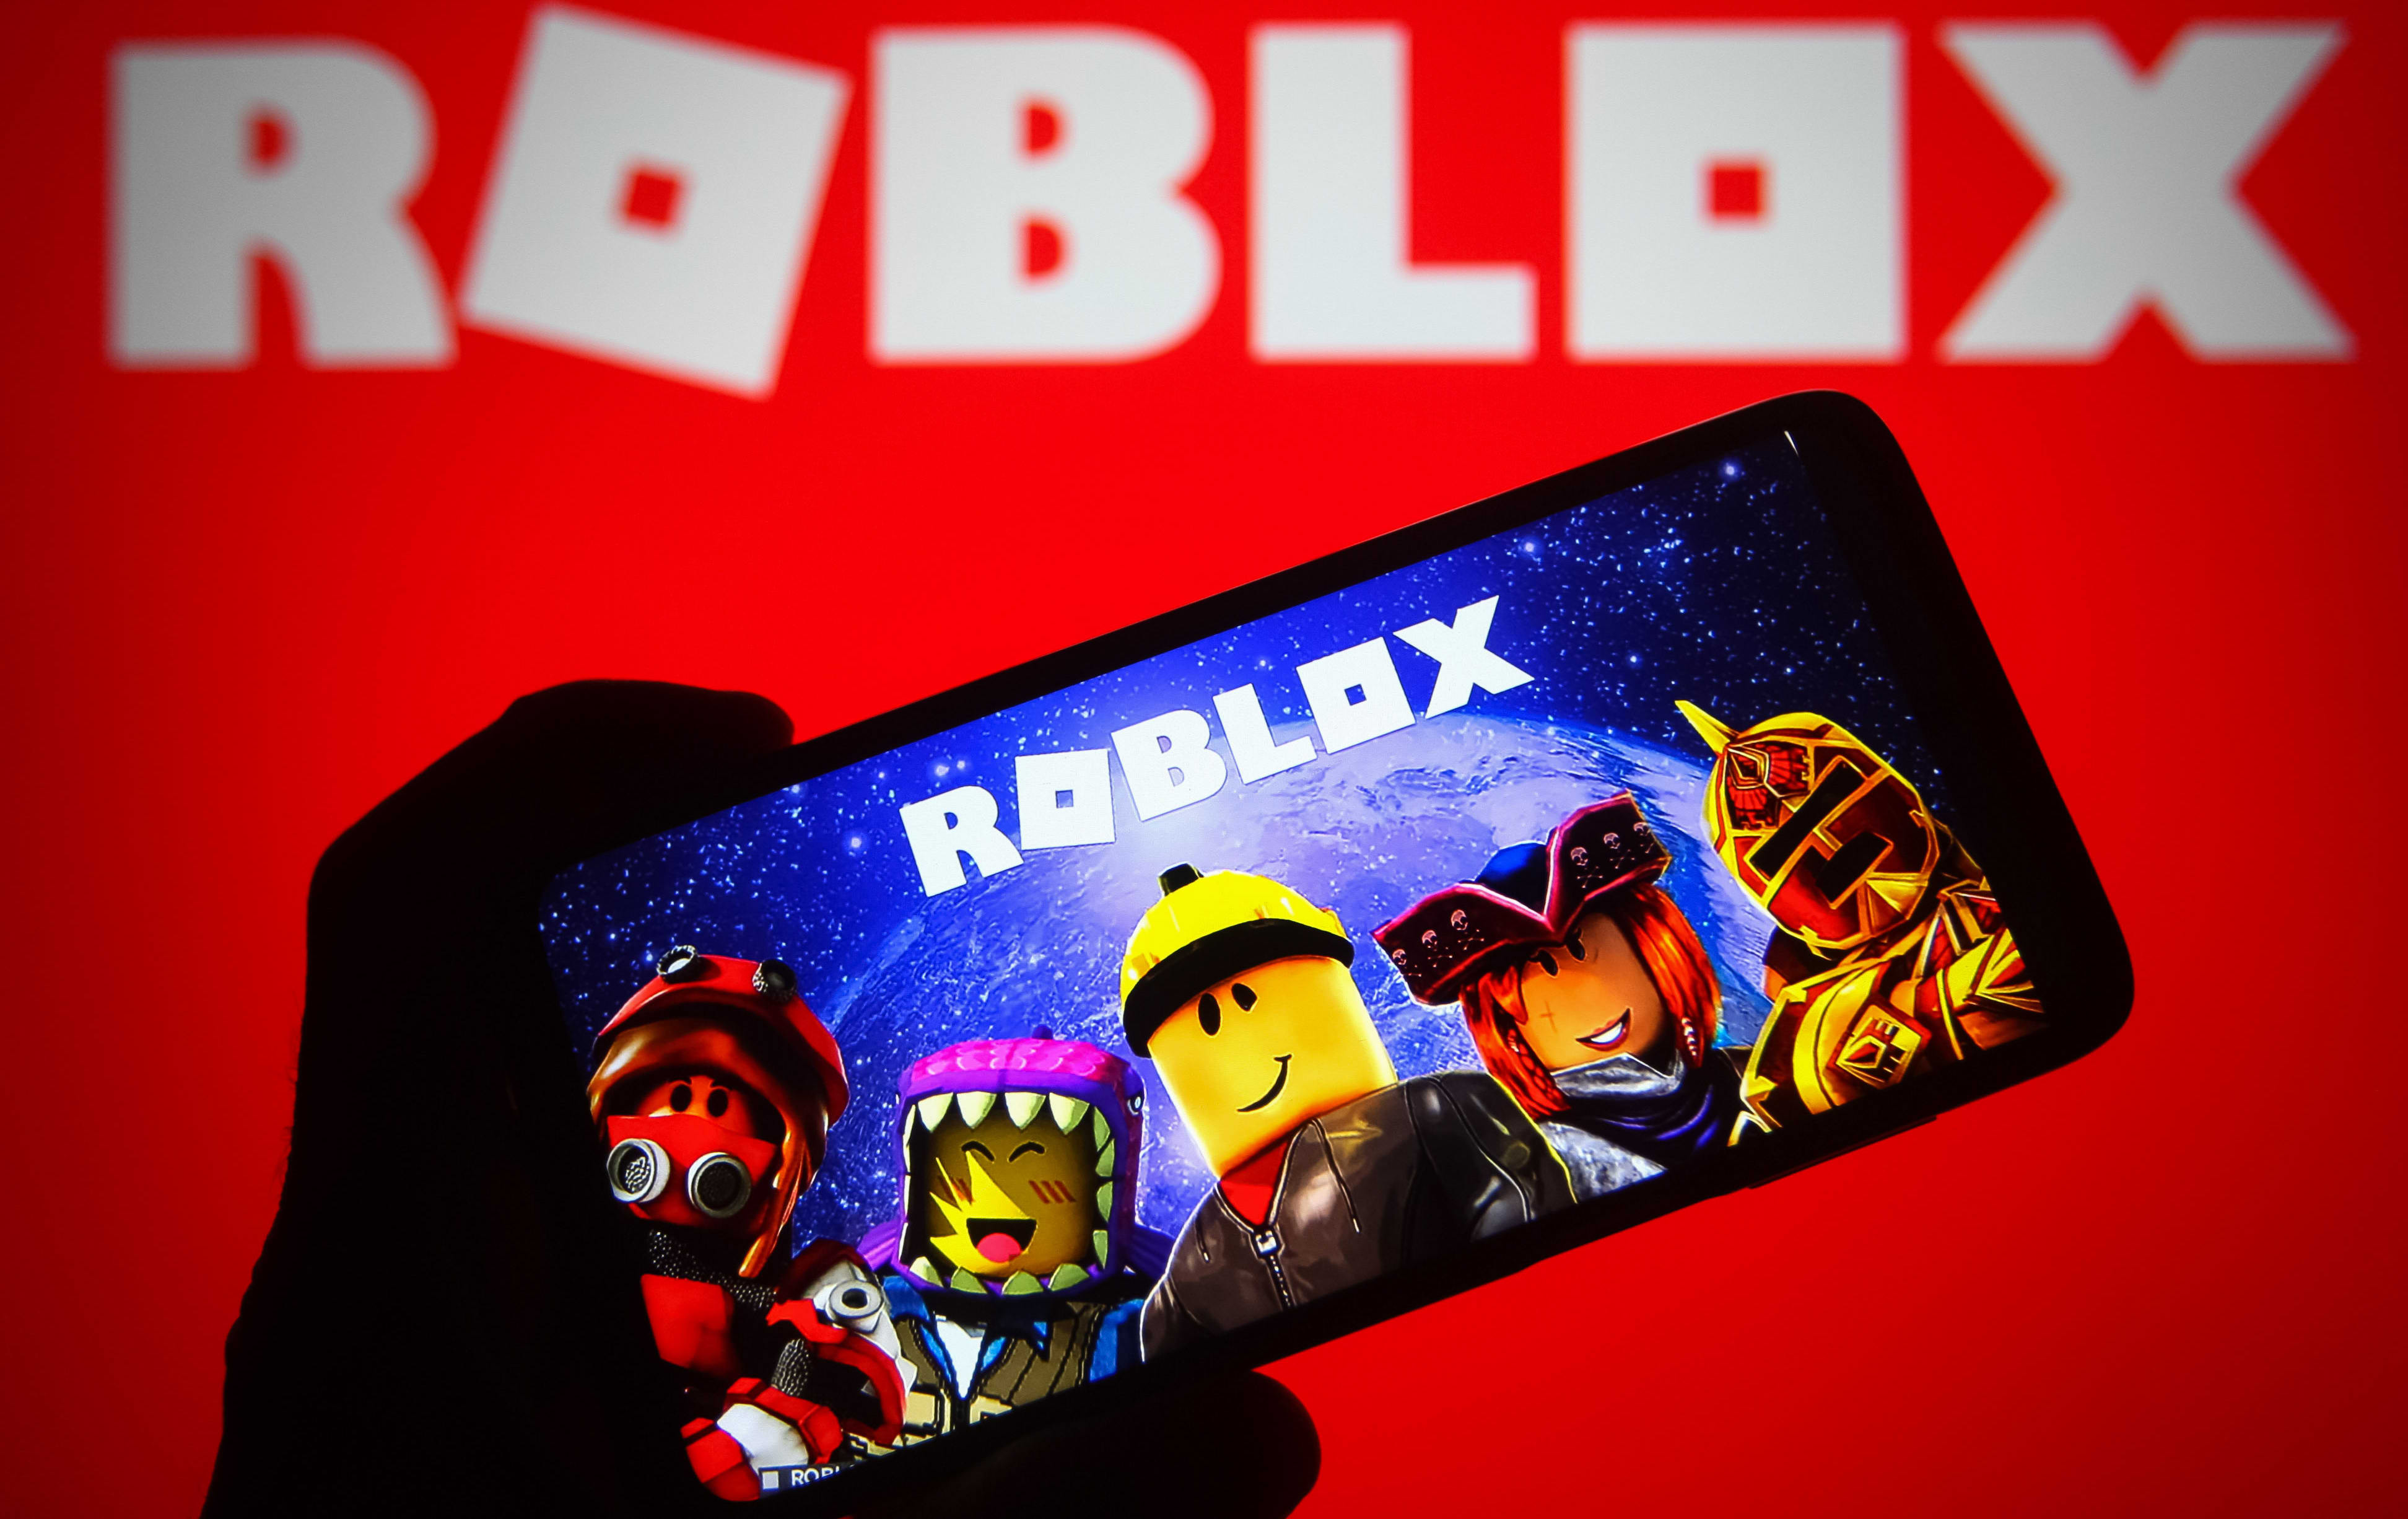 Roblox stock market listing halted over SEC revenues probe